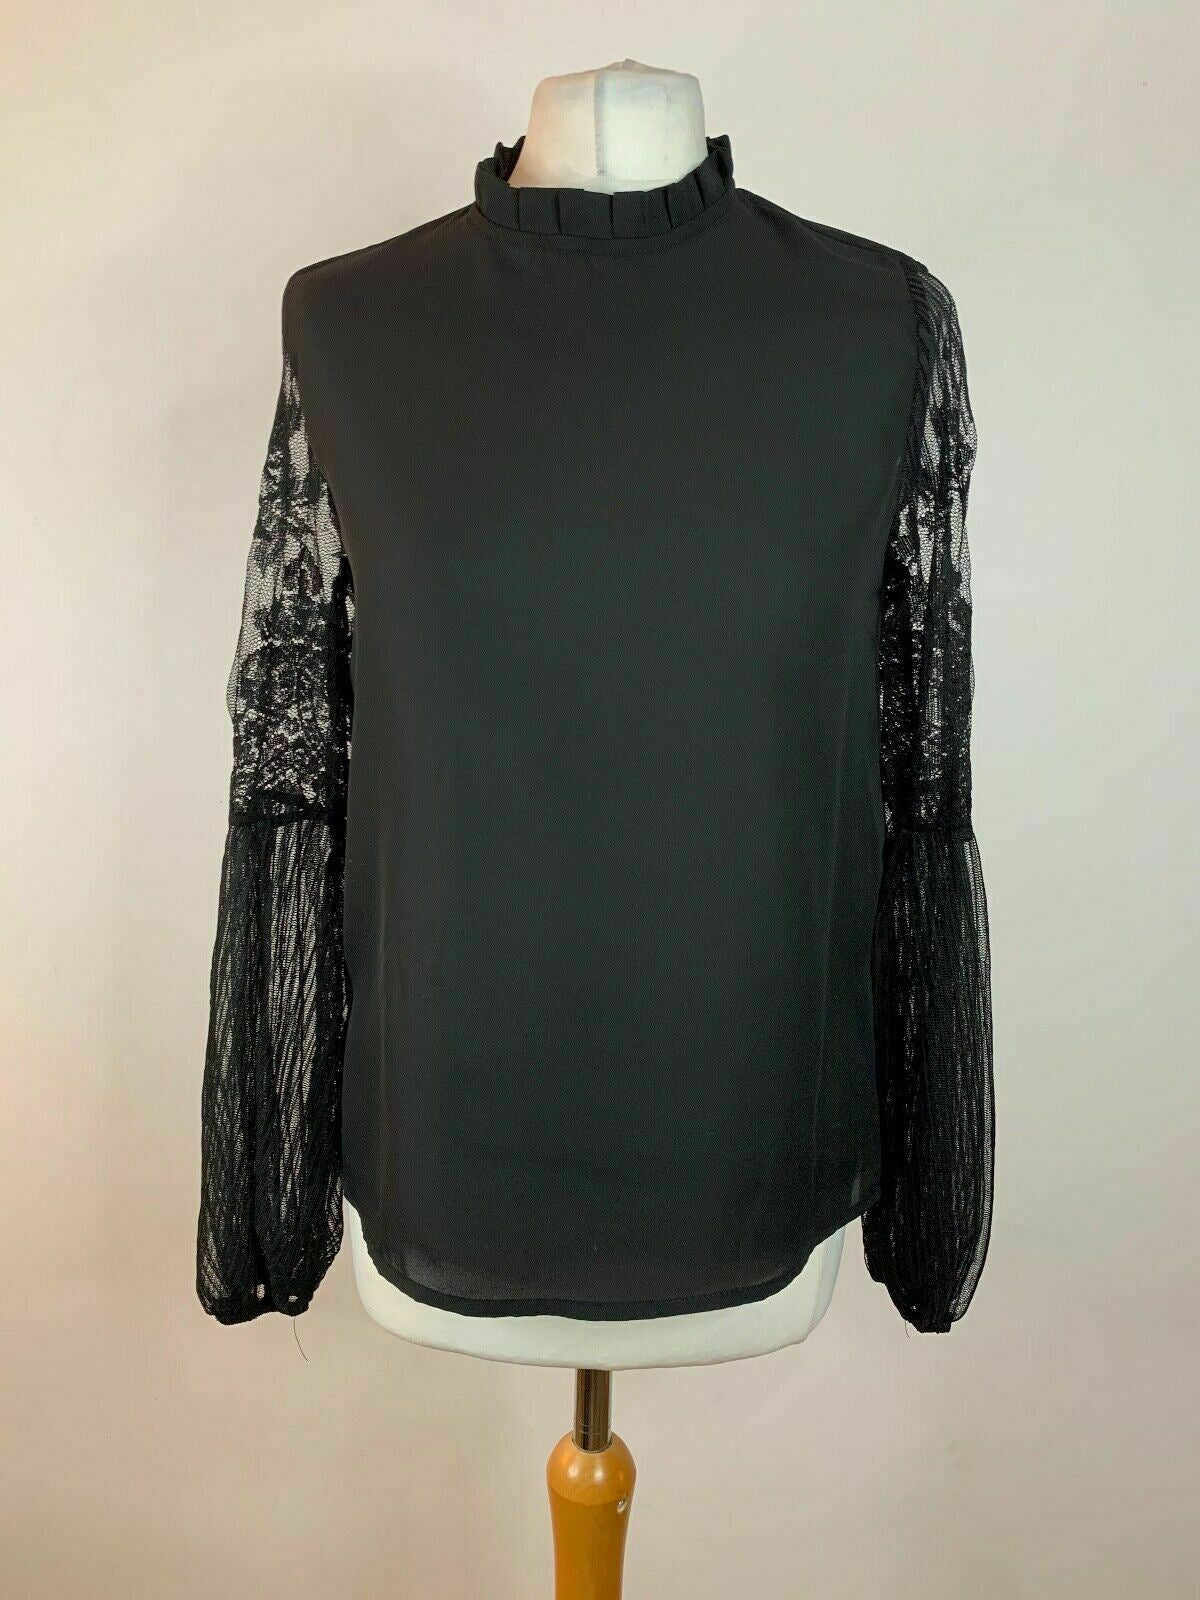 SHEIN Black Shell Top Lace Sleeve Frill Neck Size S 8 Balloon Sleeve